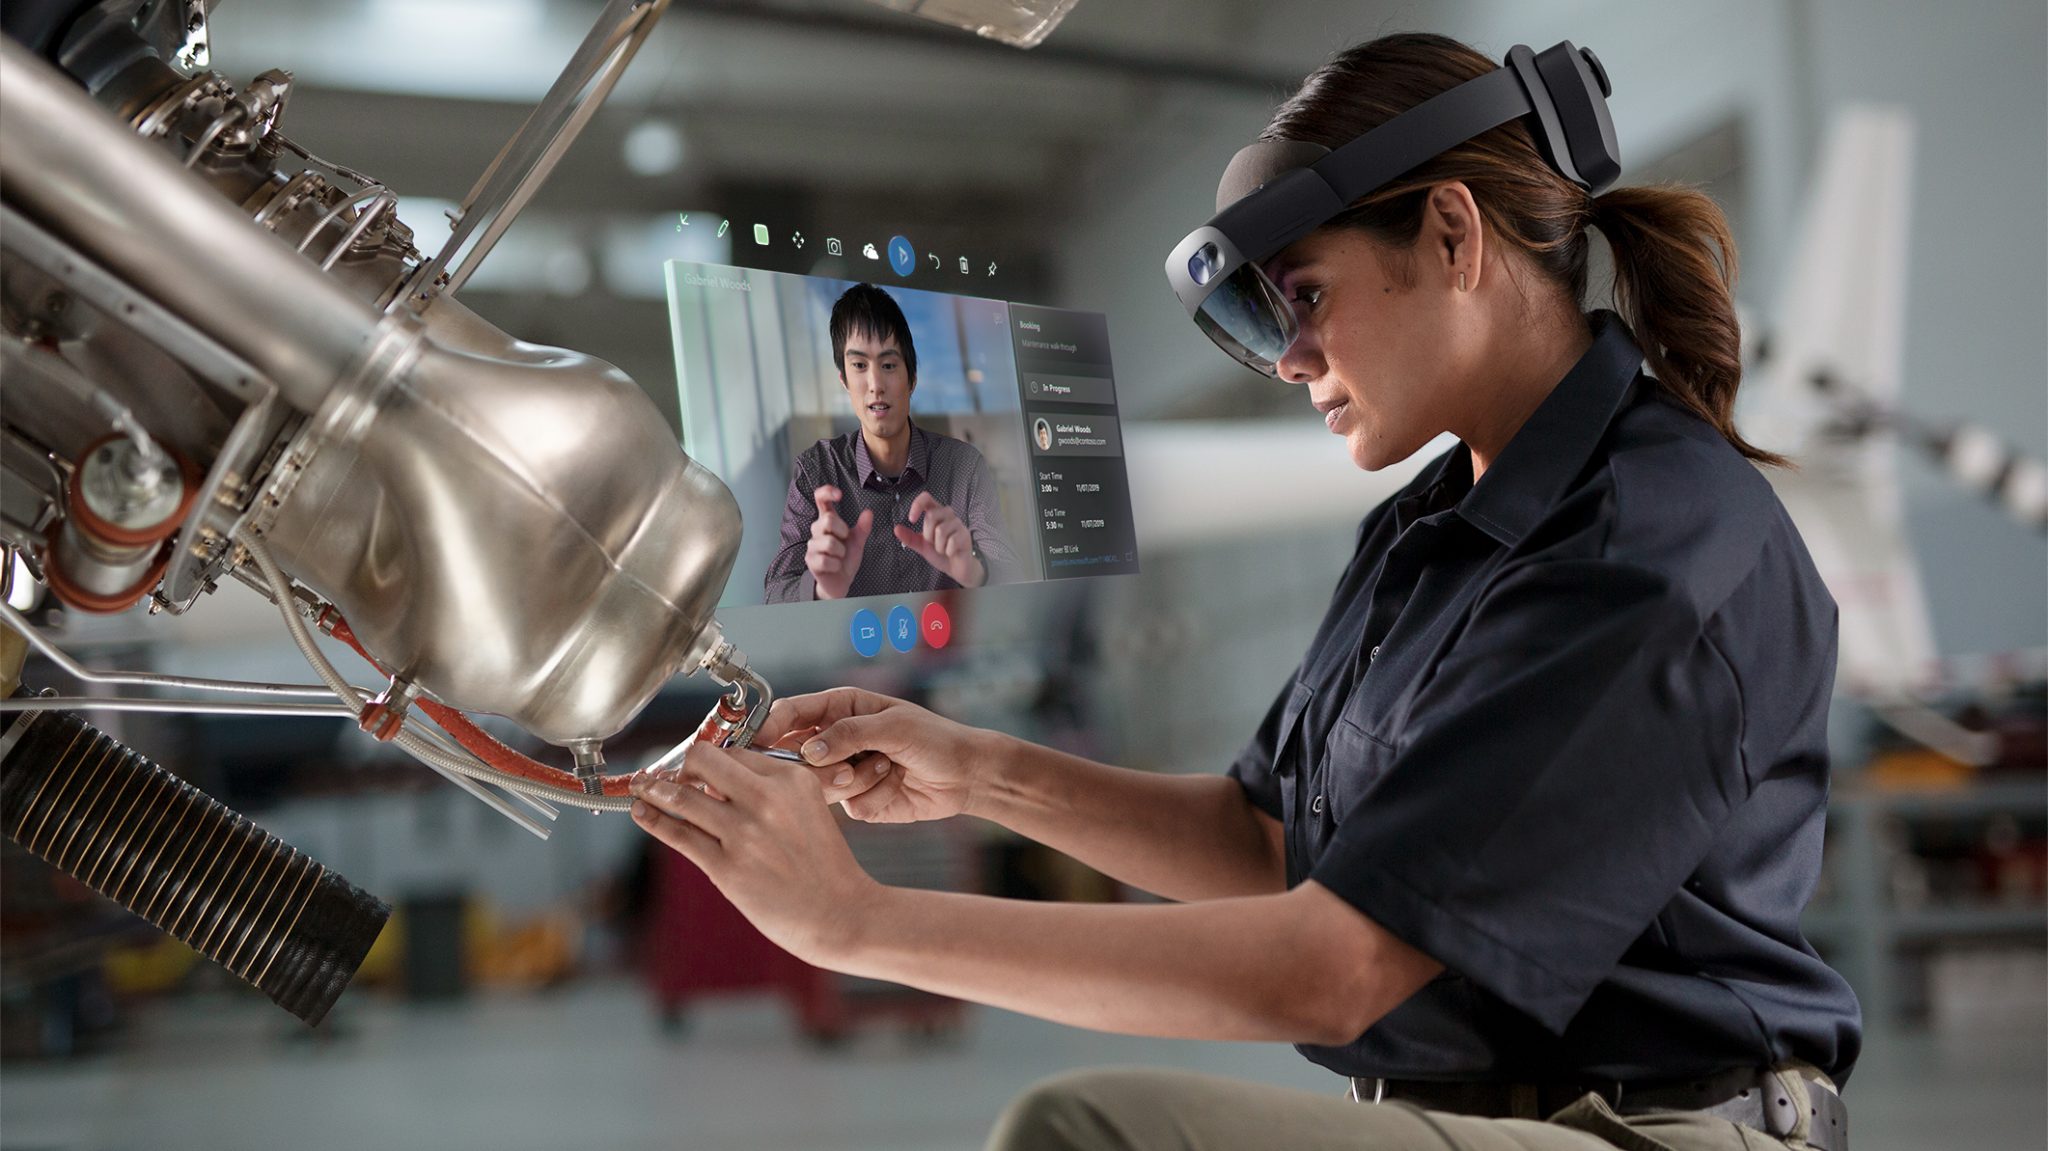 MICROSOFT SOUTH AFRICA - Unlocking The Value Of Mixed Reality In Manufacturing